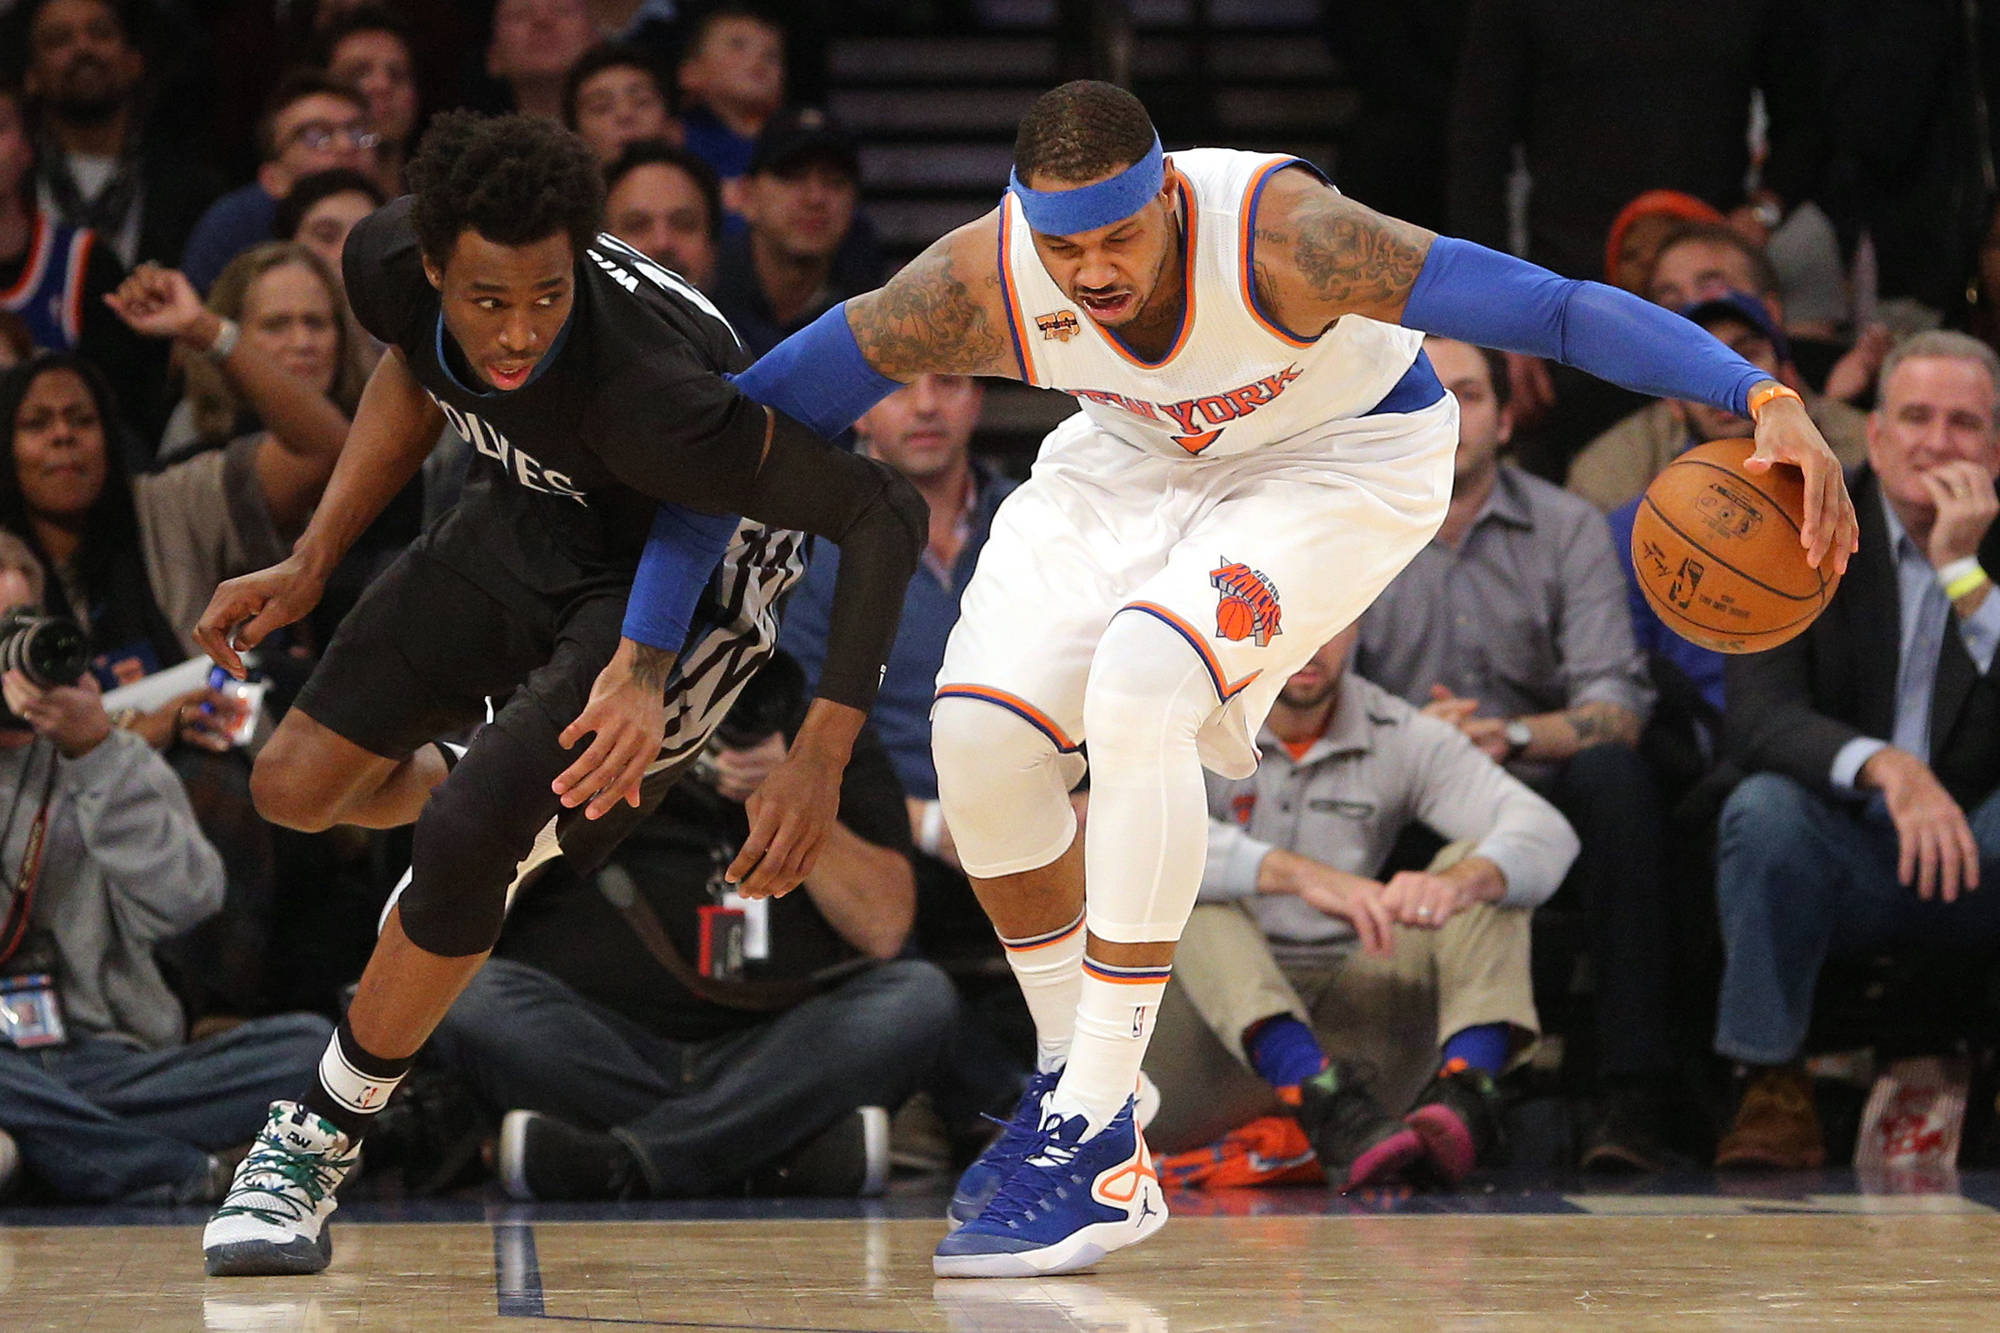 Enough with celebrating Knicks' mediocrity